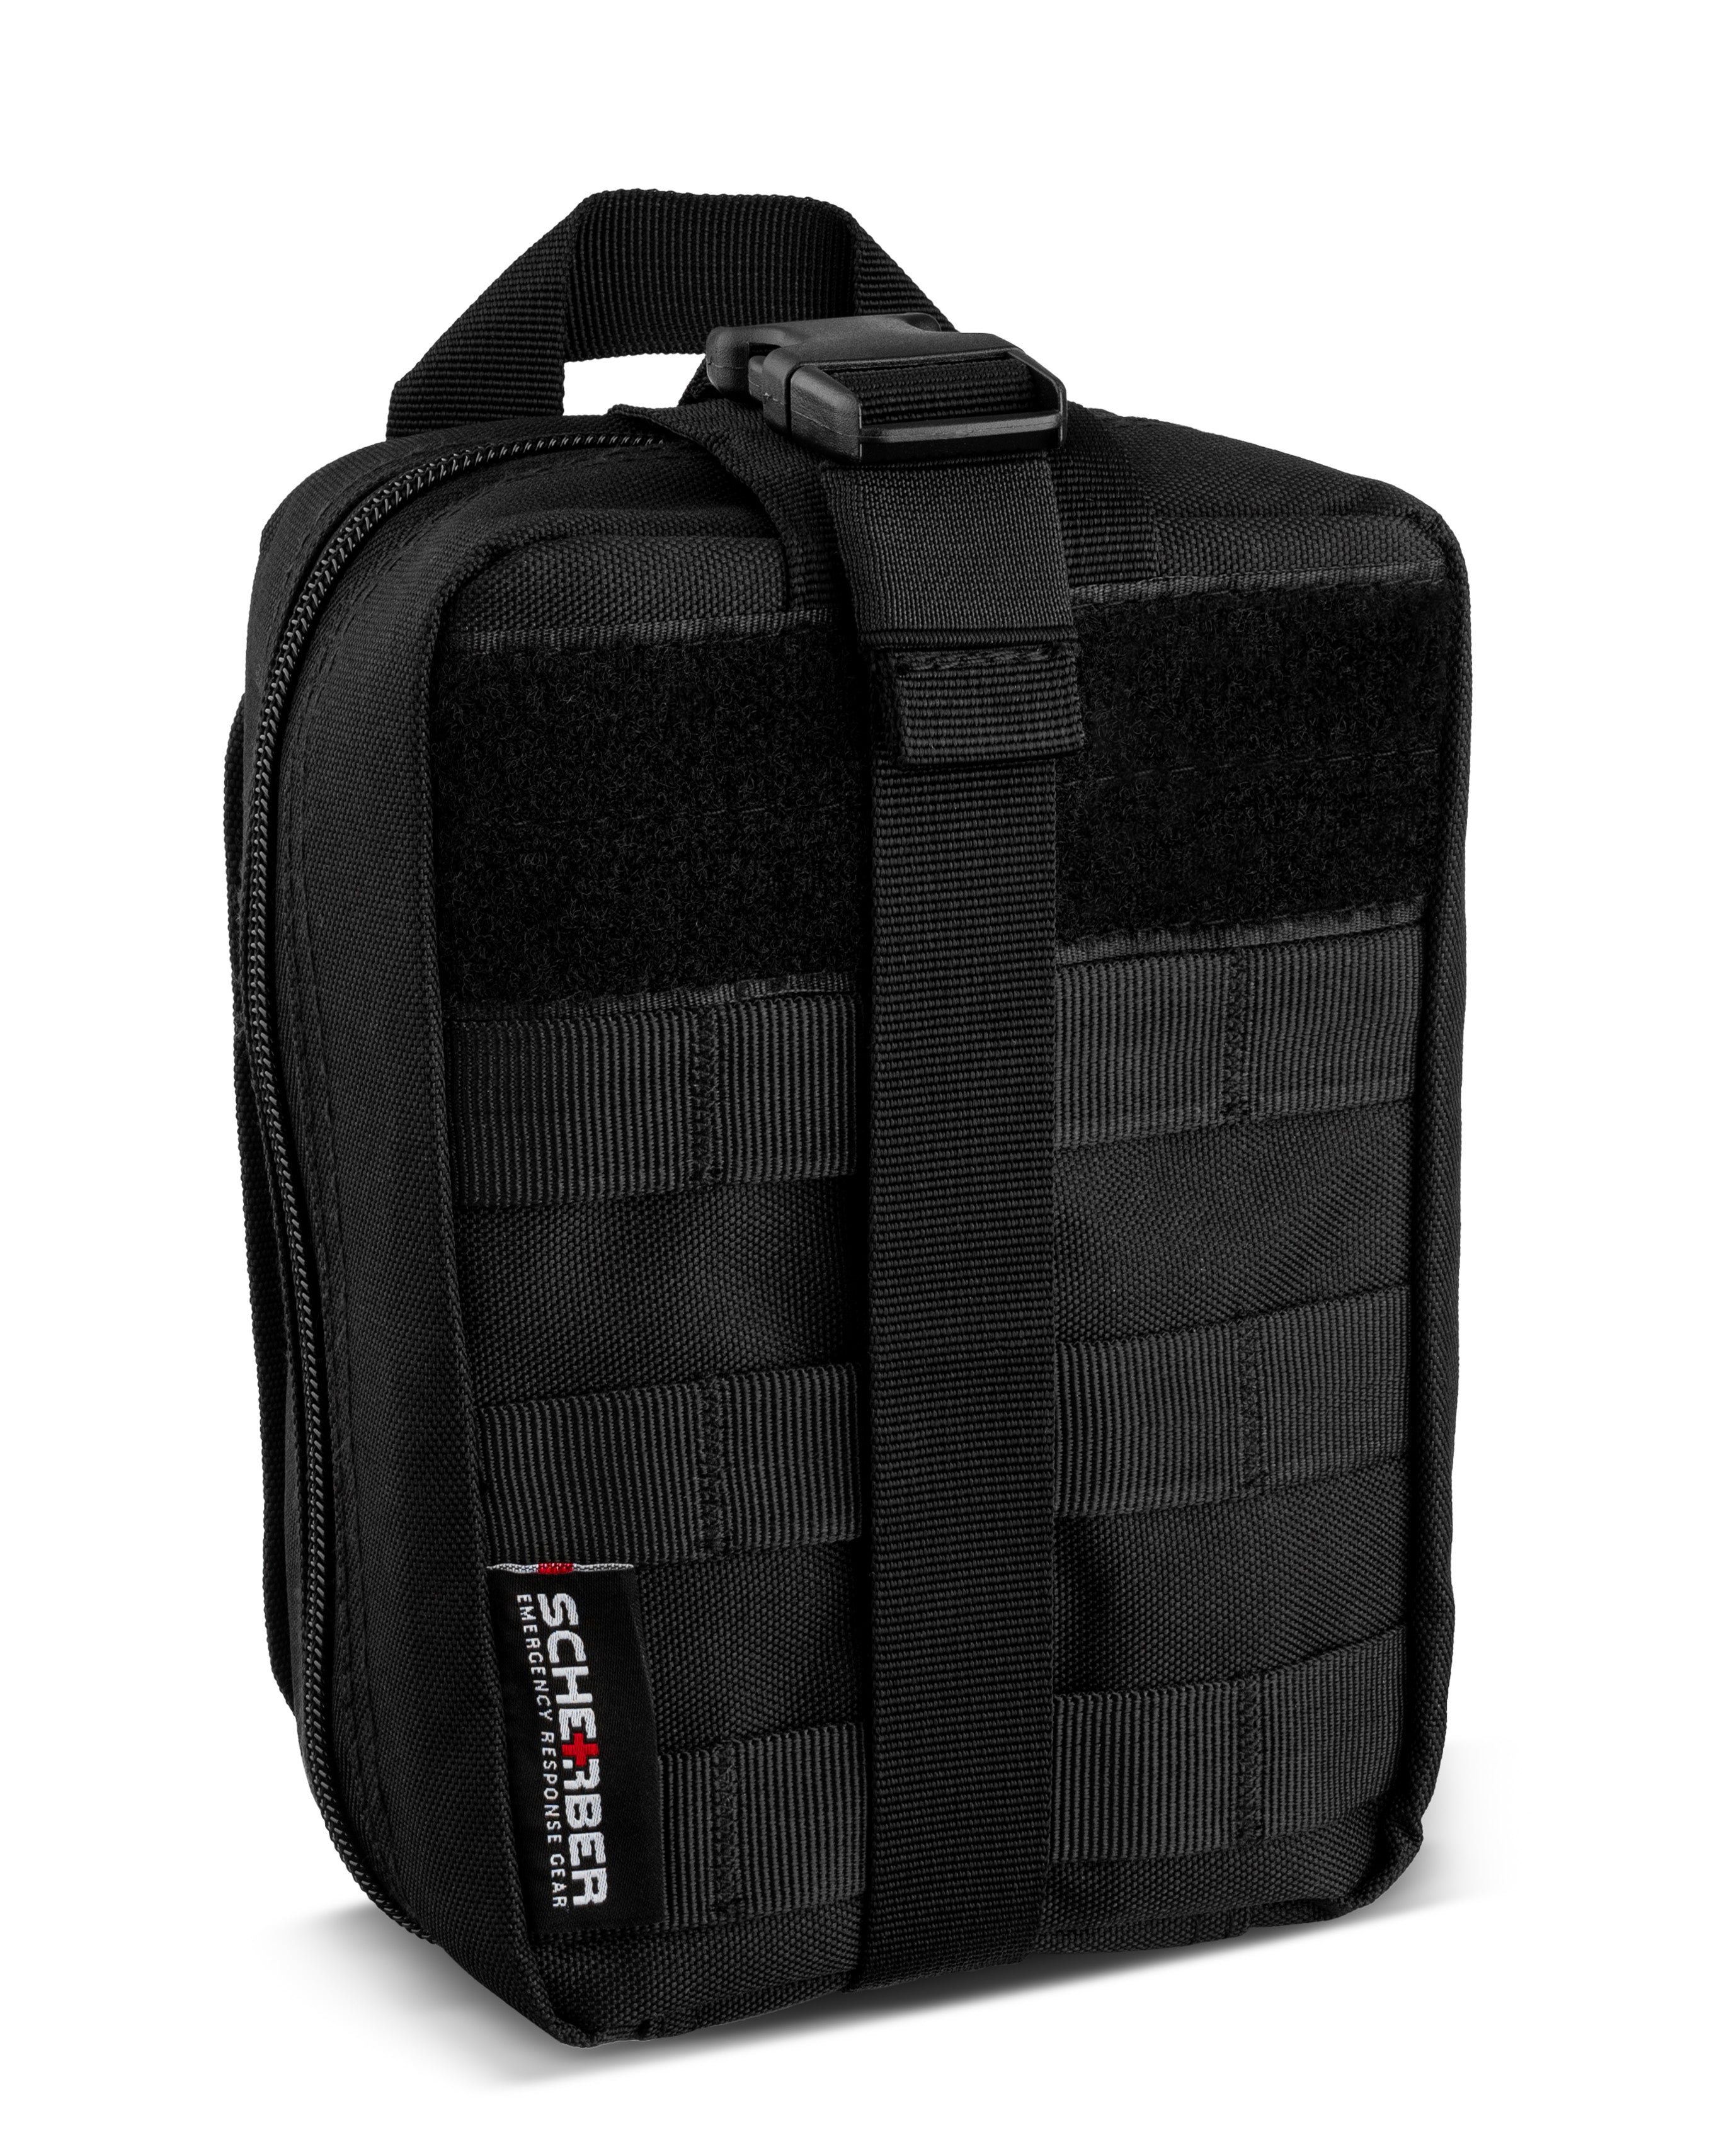 Tactical MOLLE IFAK Pouch - Onesource Fire Rescue Equipment